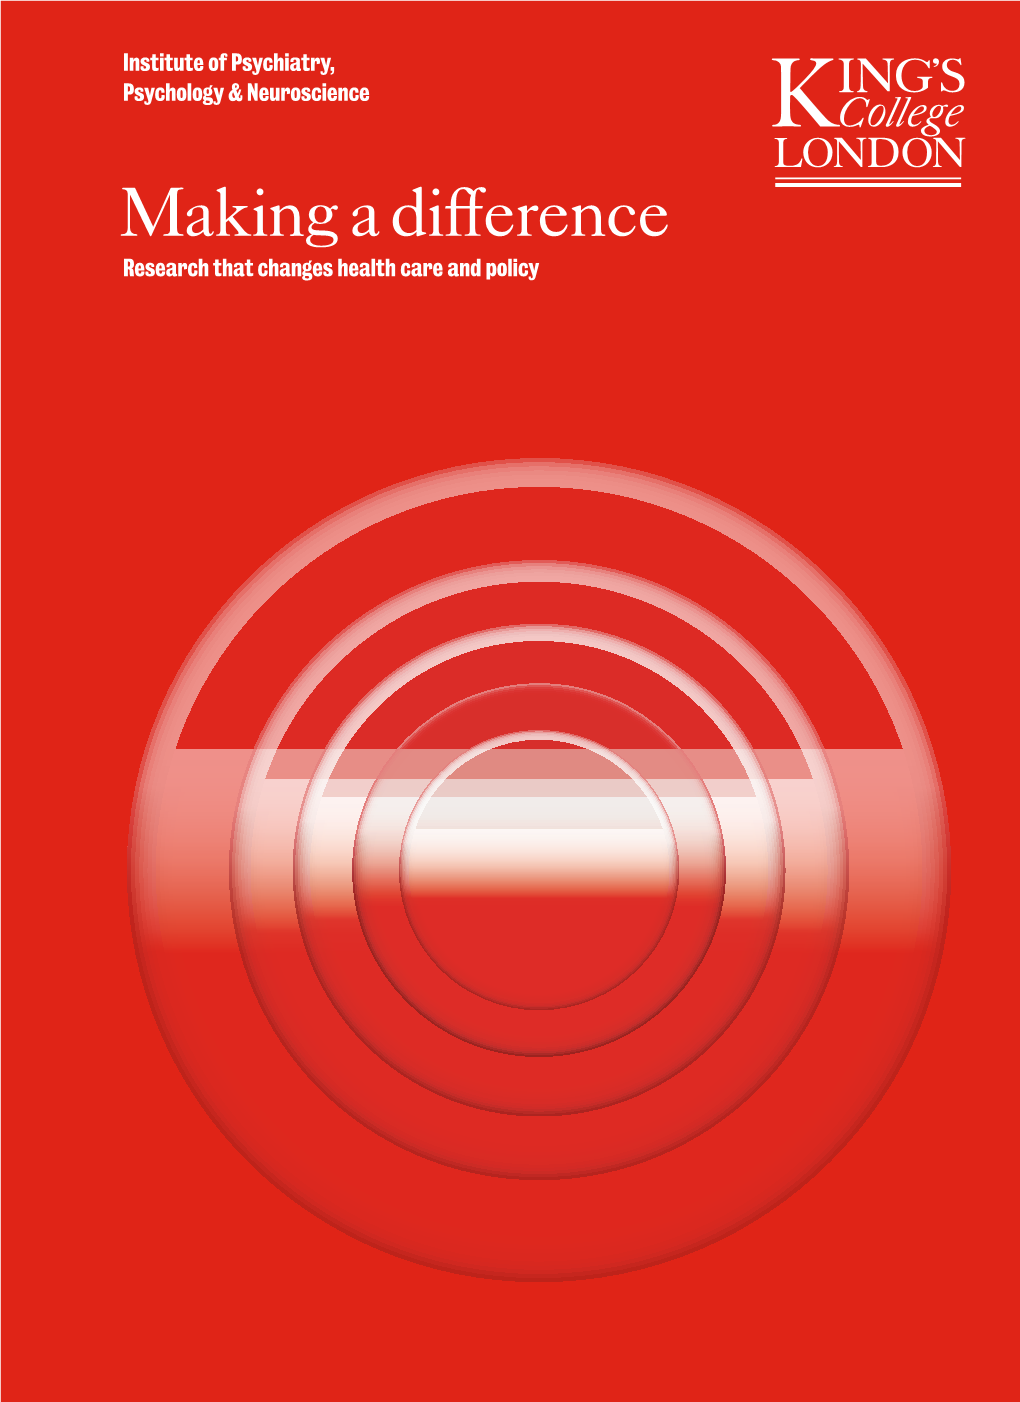 Examples of Our Impact Can Be Found in the Making a Difference PDF